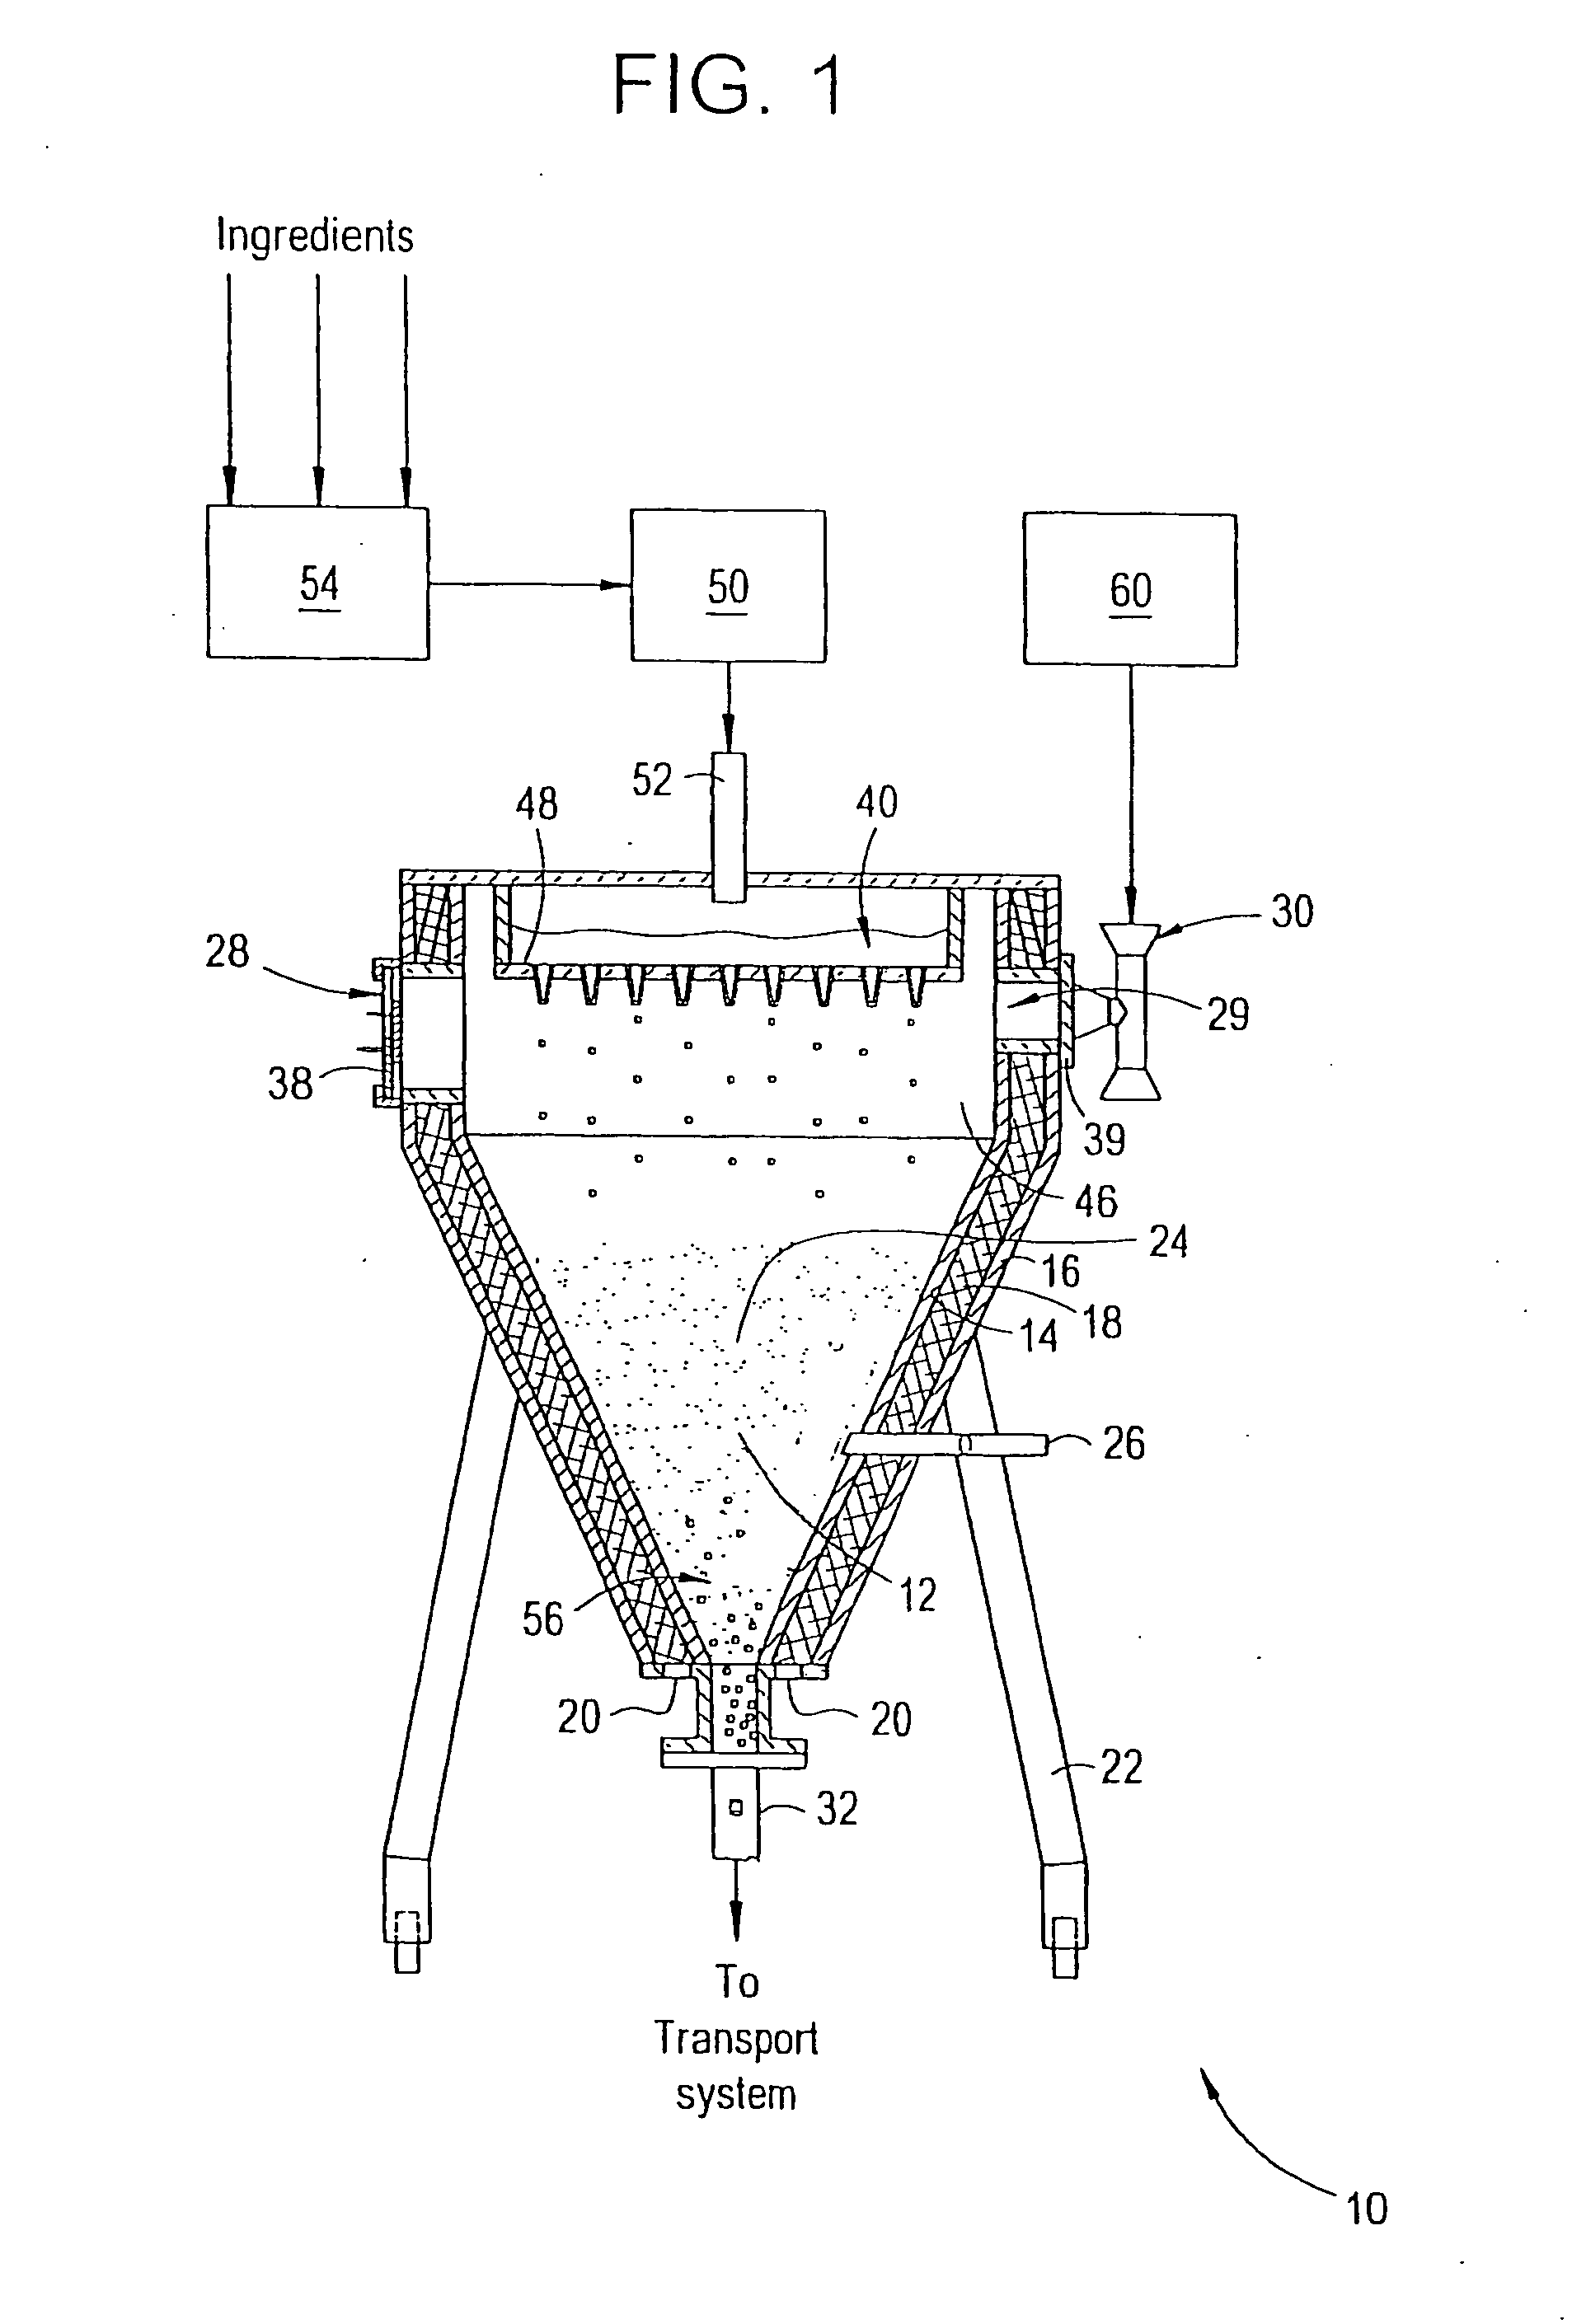 Method and system for flash freezing tea-flavored liquid and making tea-based beverages